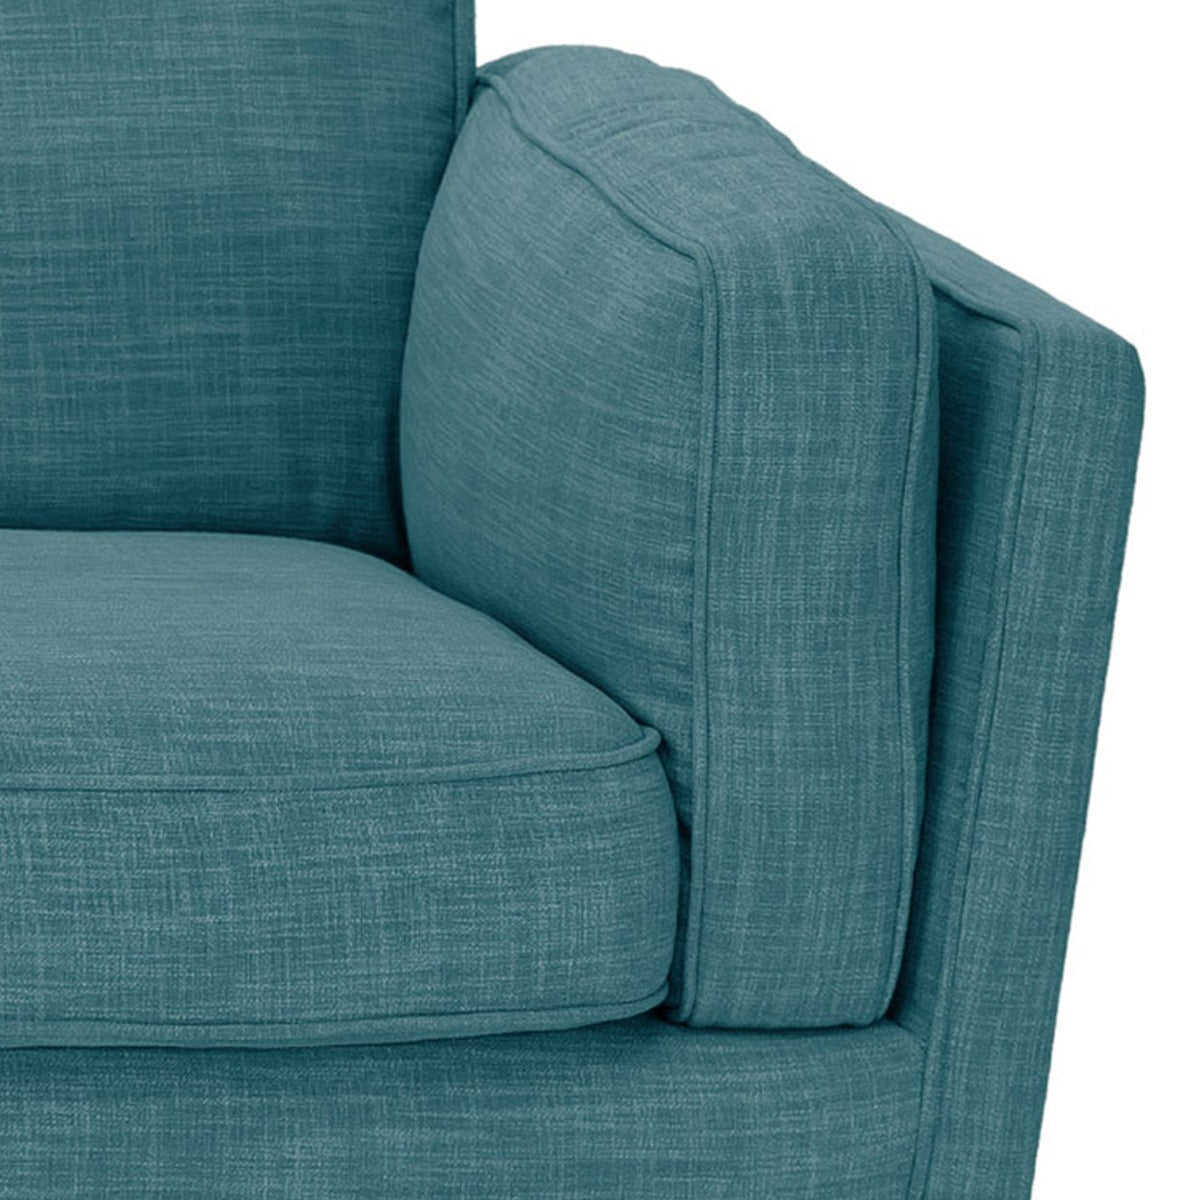 Rebo Fabric Lounge 3 Seater Sofa with Solid Wooden Frame - Teal - Notbrand